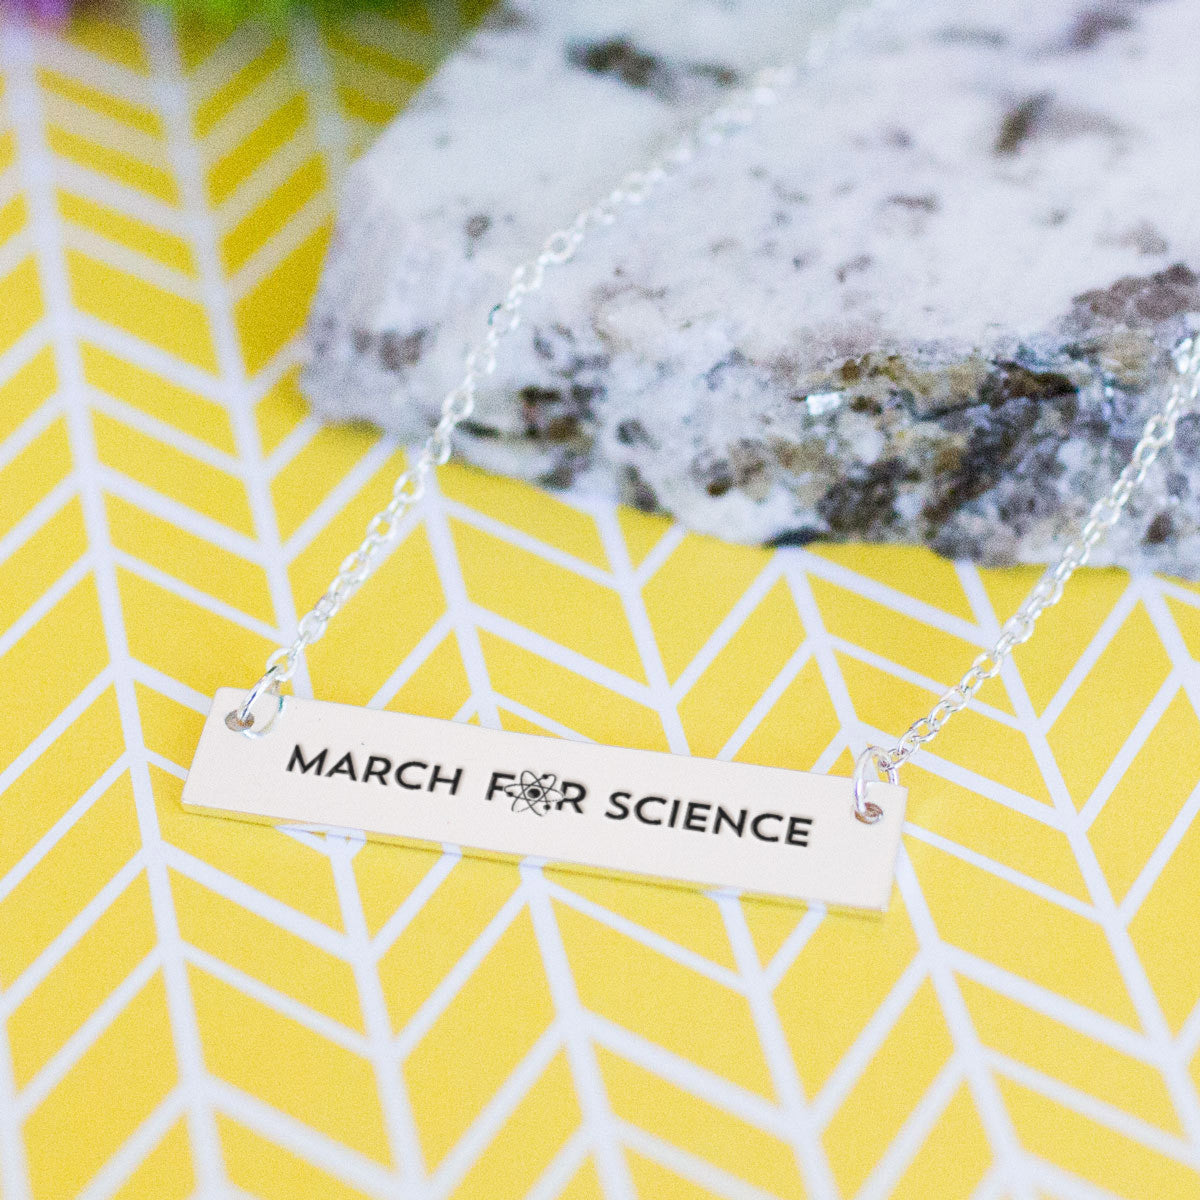 March for Science Gold / Silver Bar Necklace - pipercleo.com